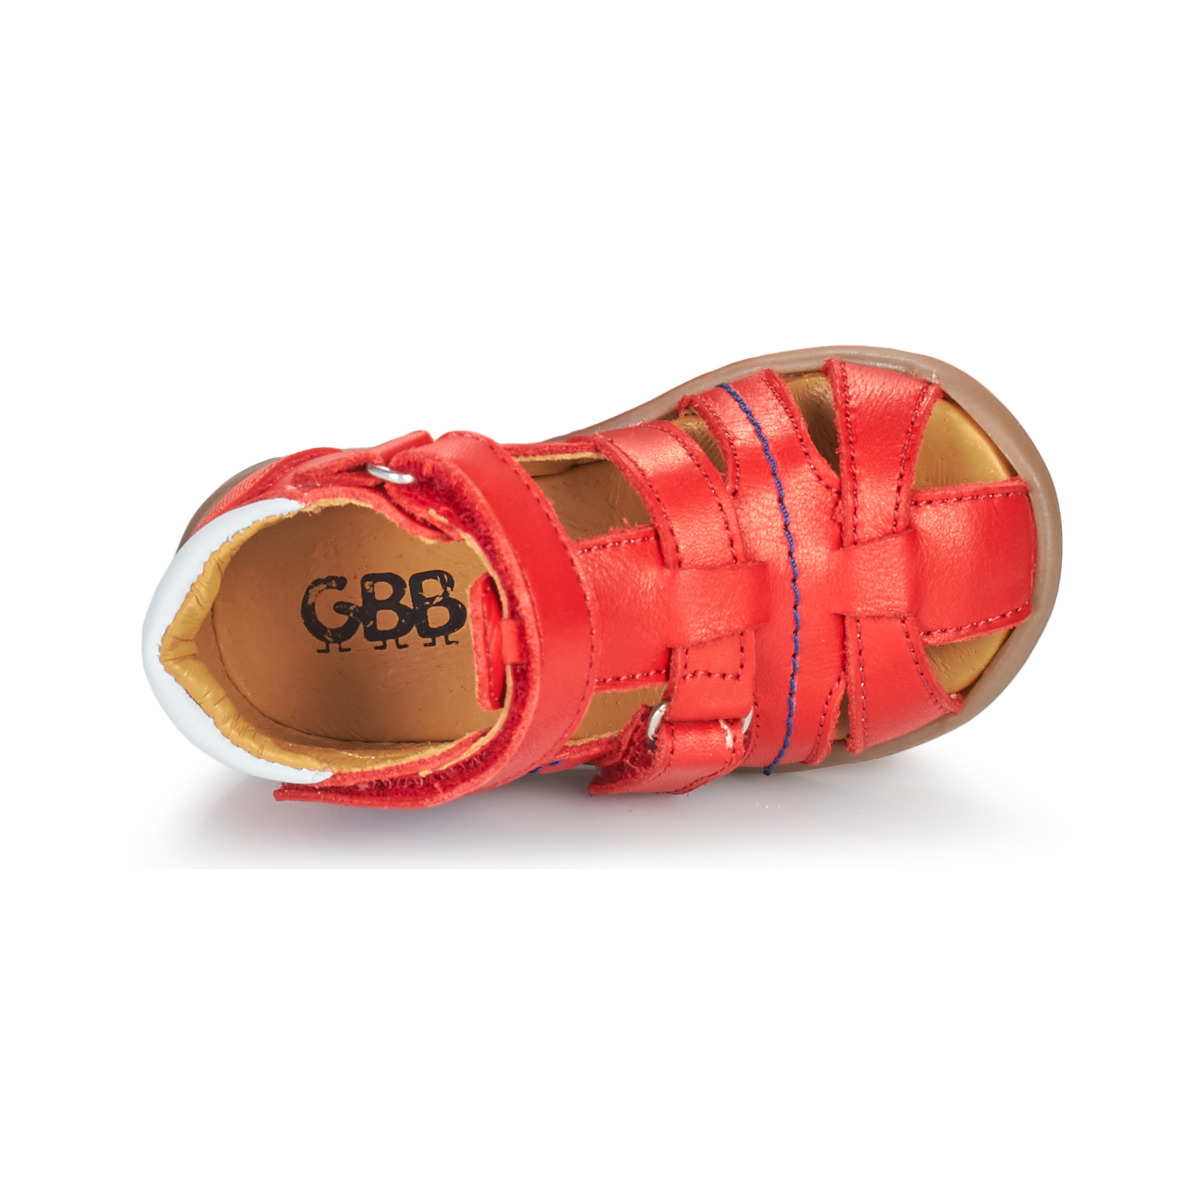 GBB Rouge DOULOU WxFhi6a9